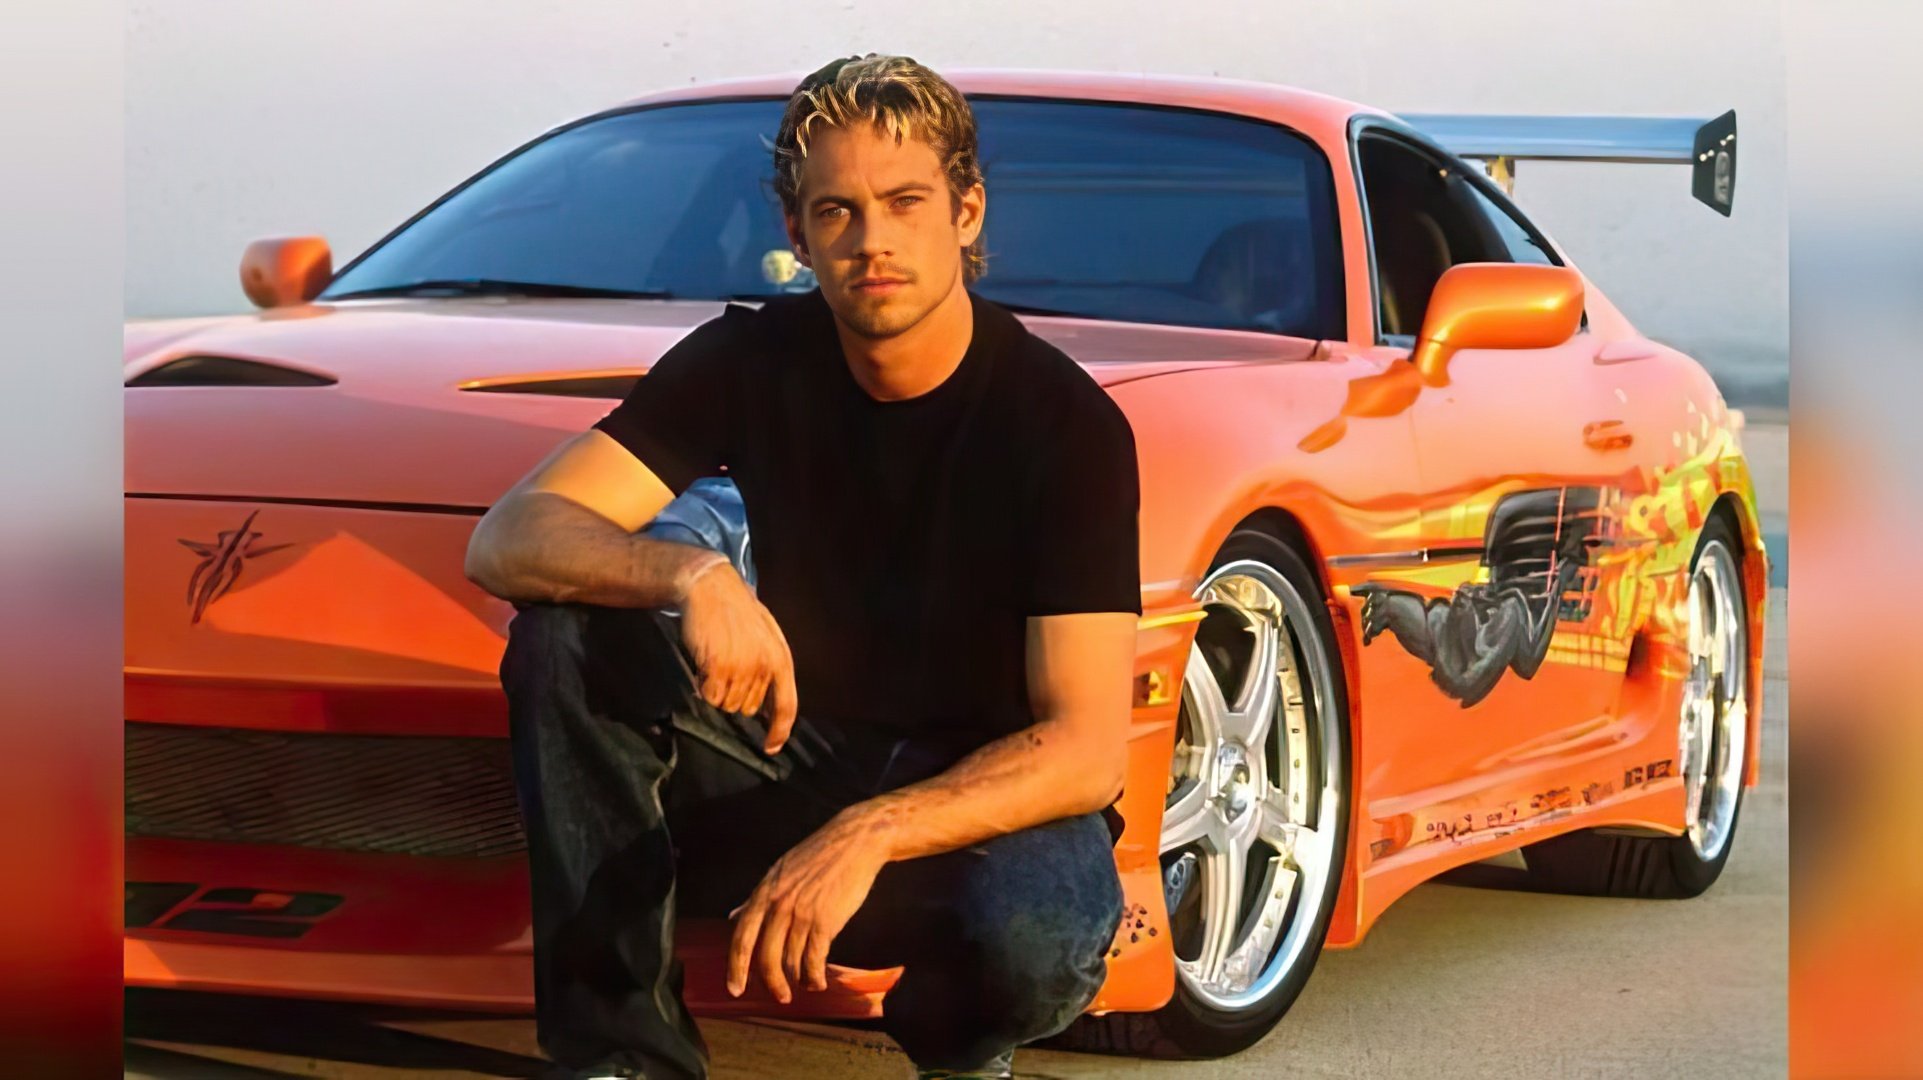 ‘The Fast and the Furious’ was Paul Walker's star-making role